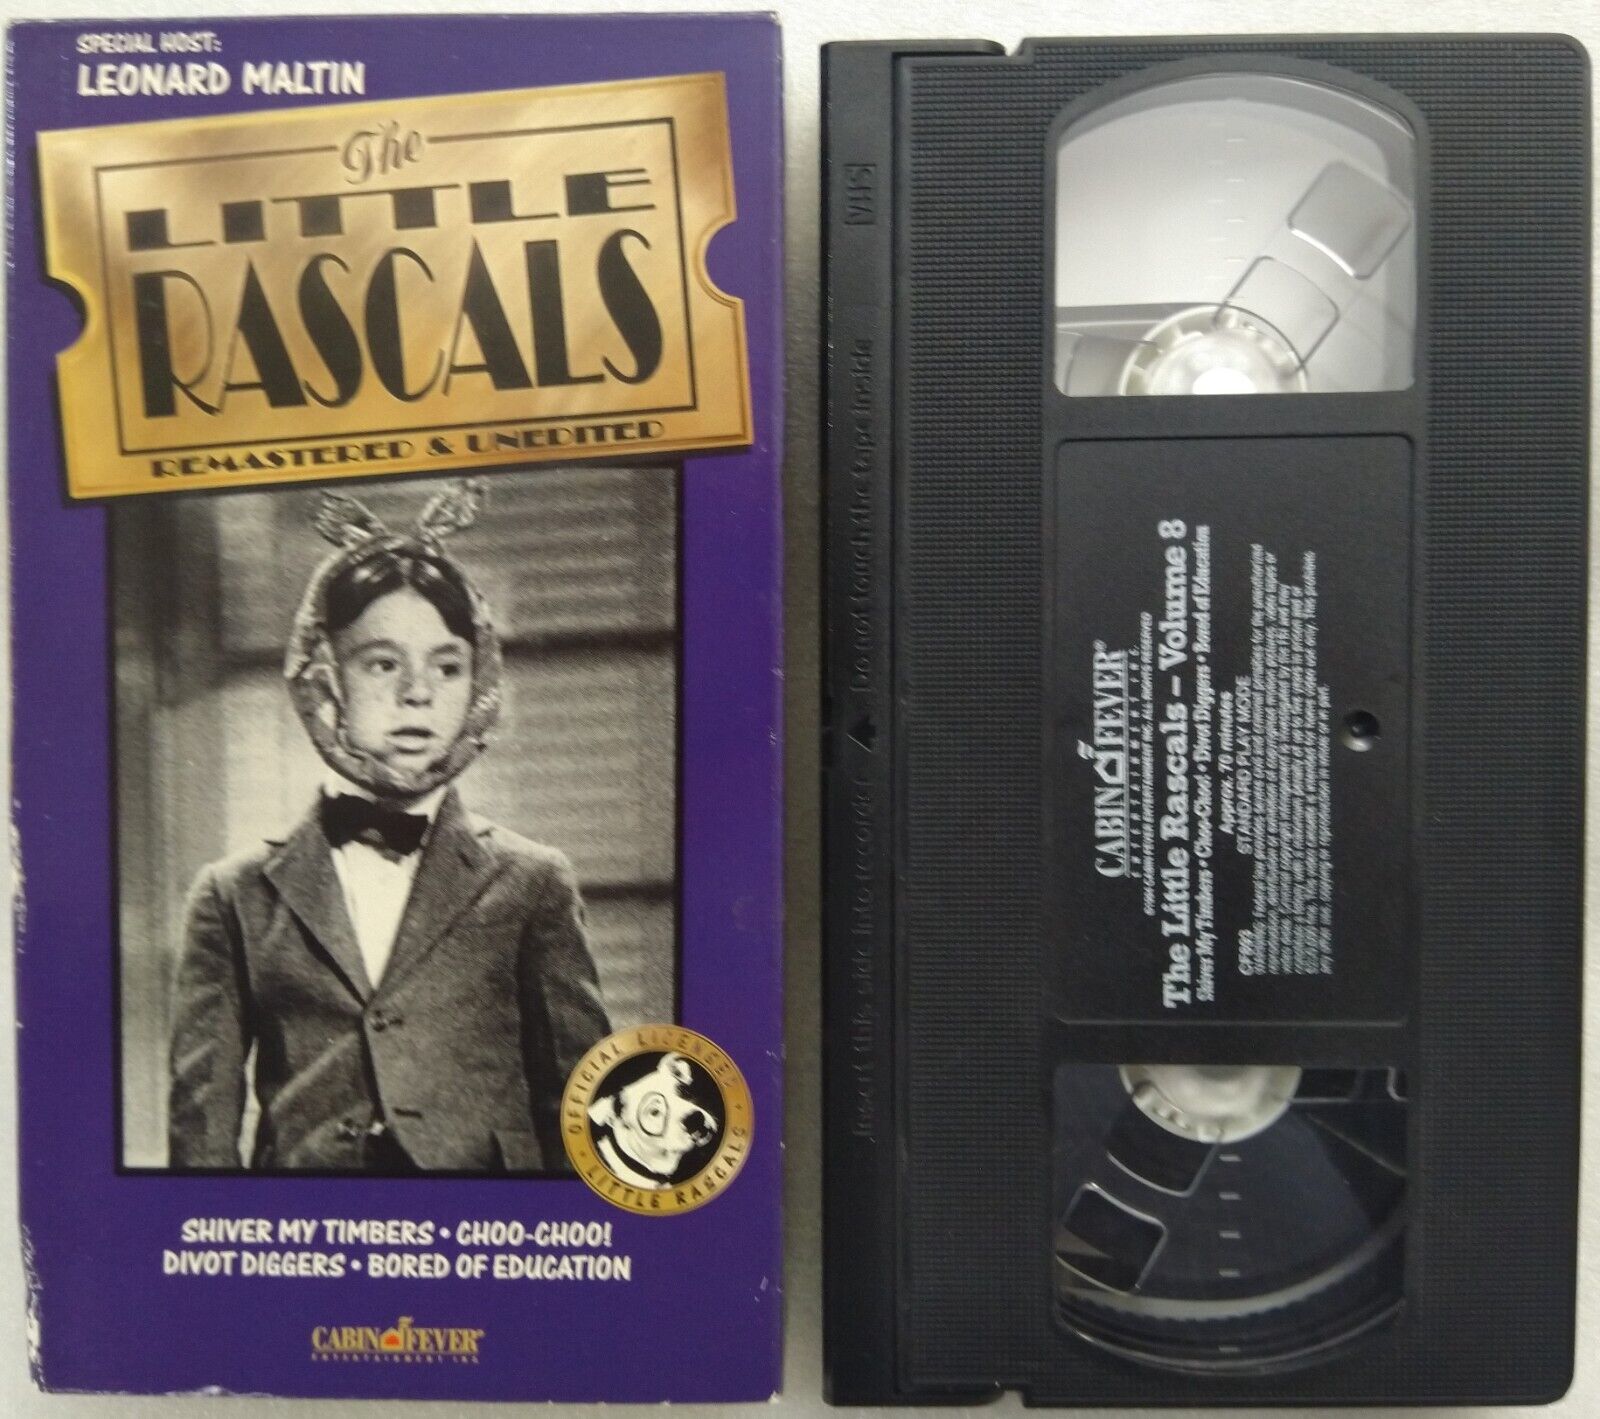 VHS The Little Rascals - The Rascals Remastered and Unedited Vol 8 (VHS ...